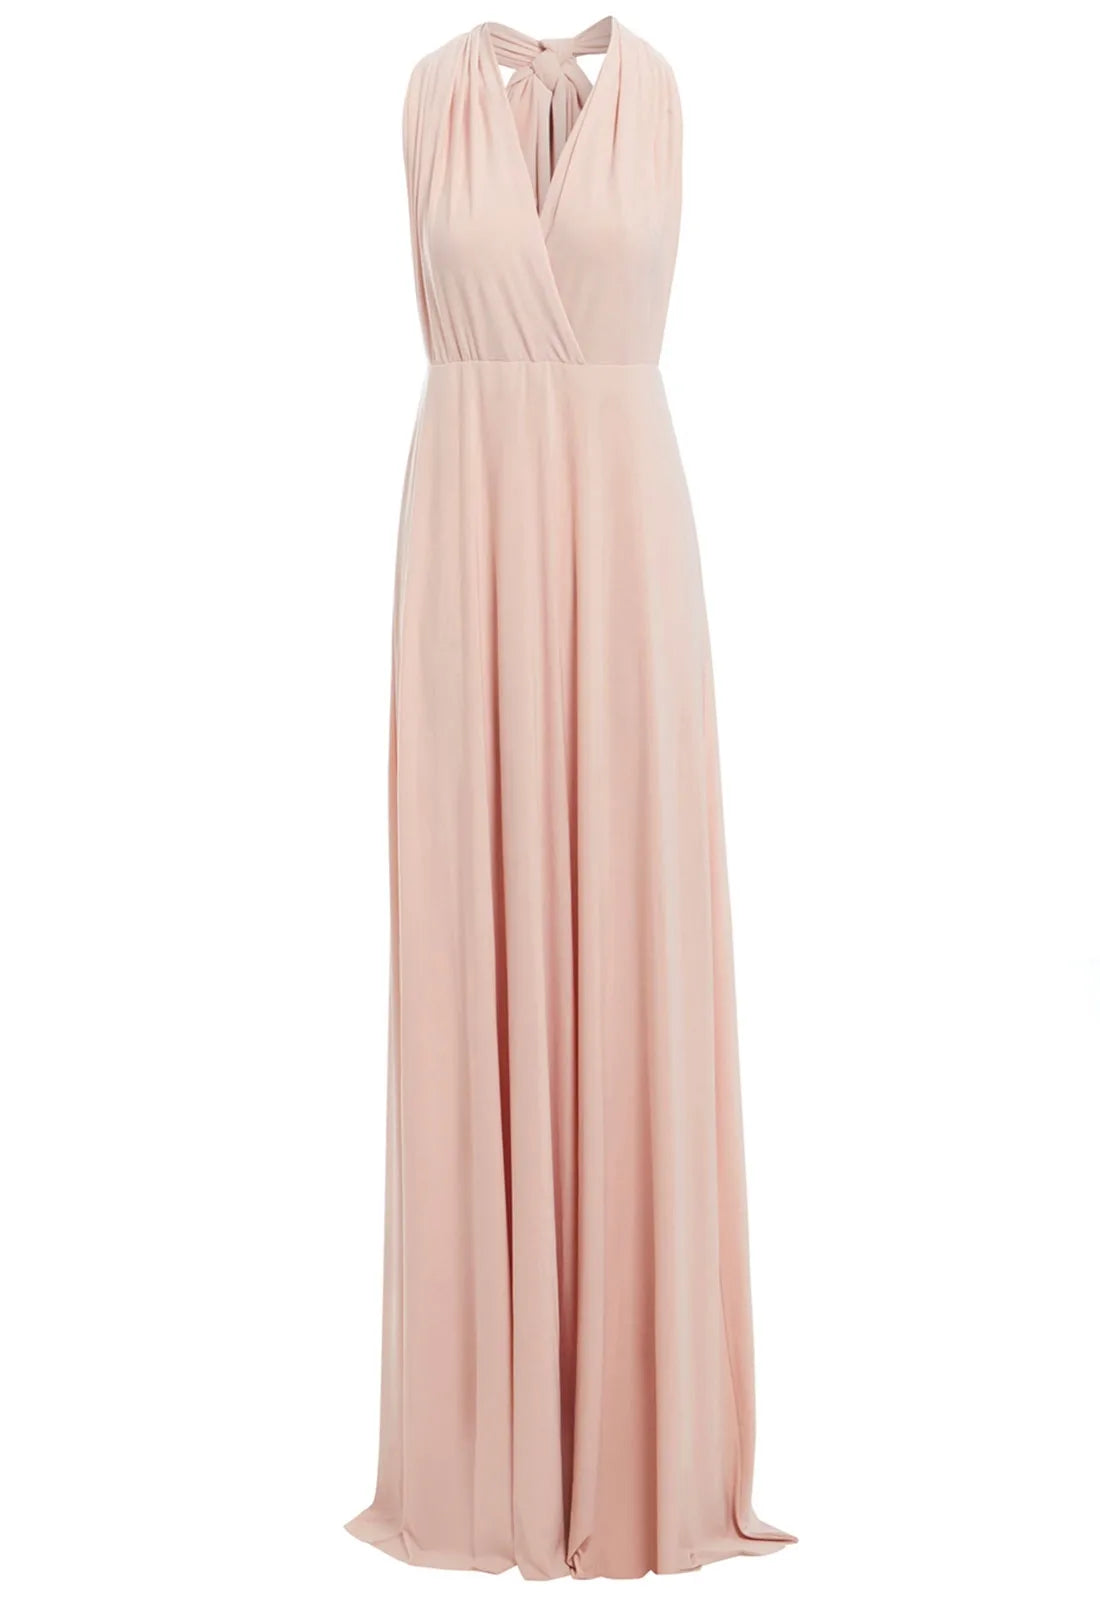 Revie Alexis Multiway Maxi Dress in Nude-13533